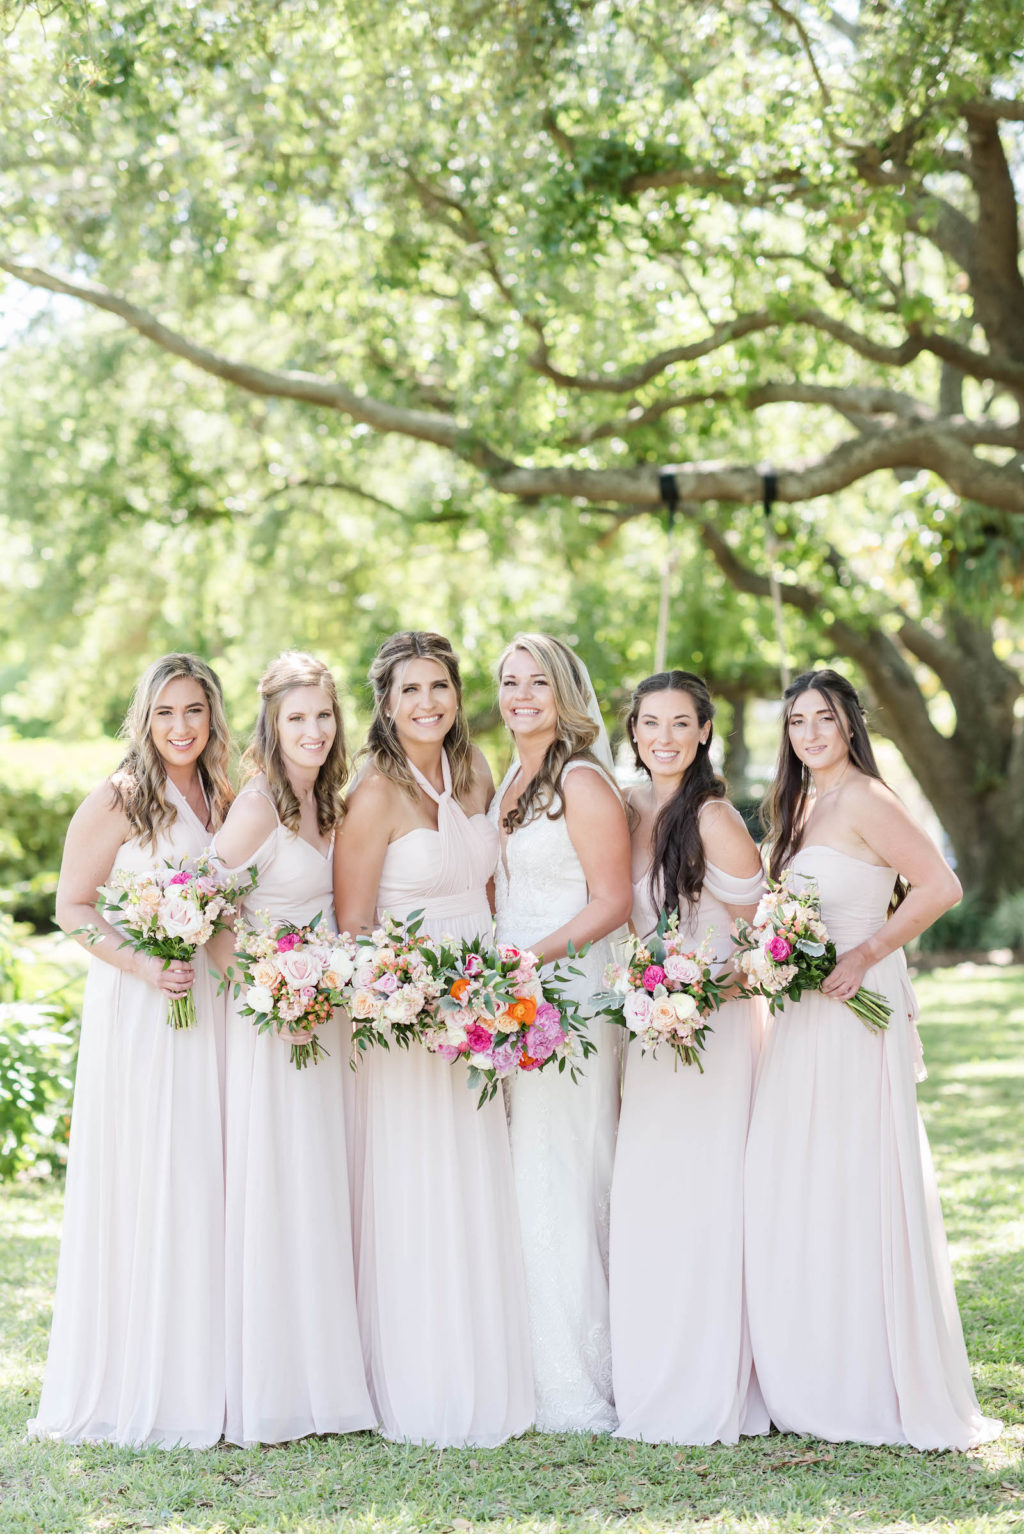 Mismatched Long Blush Bridesmaids Dresses for Garden Wedding | Neutral Bridesmaid Gowns by Birdy Grey